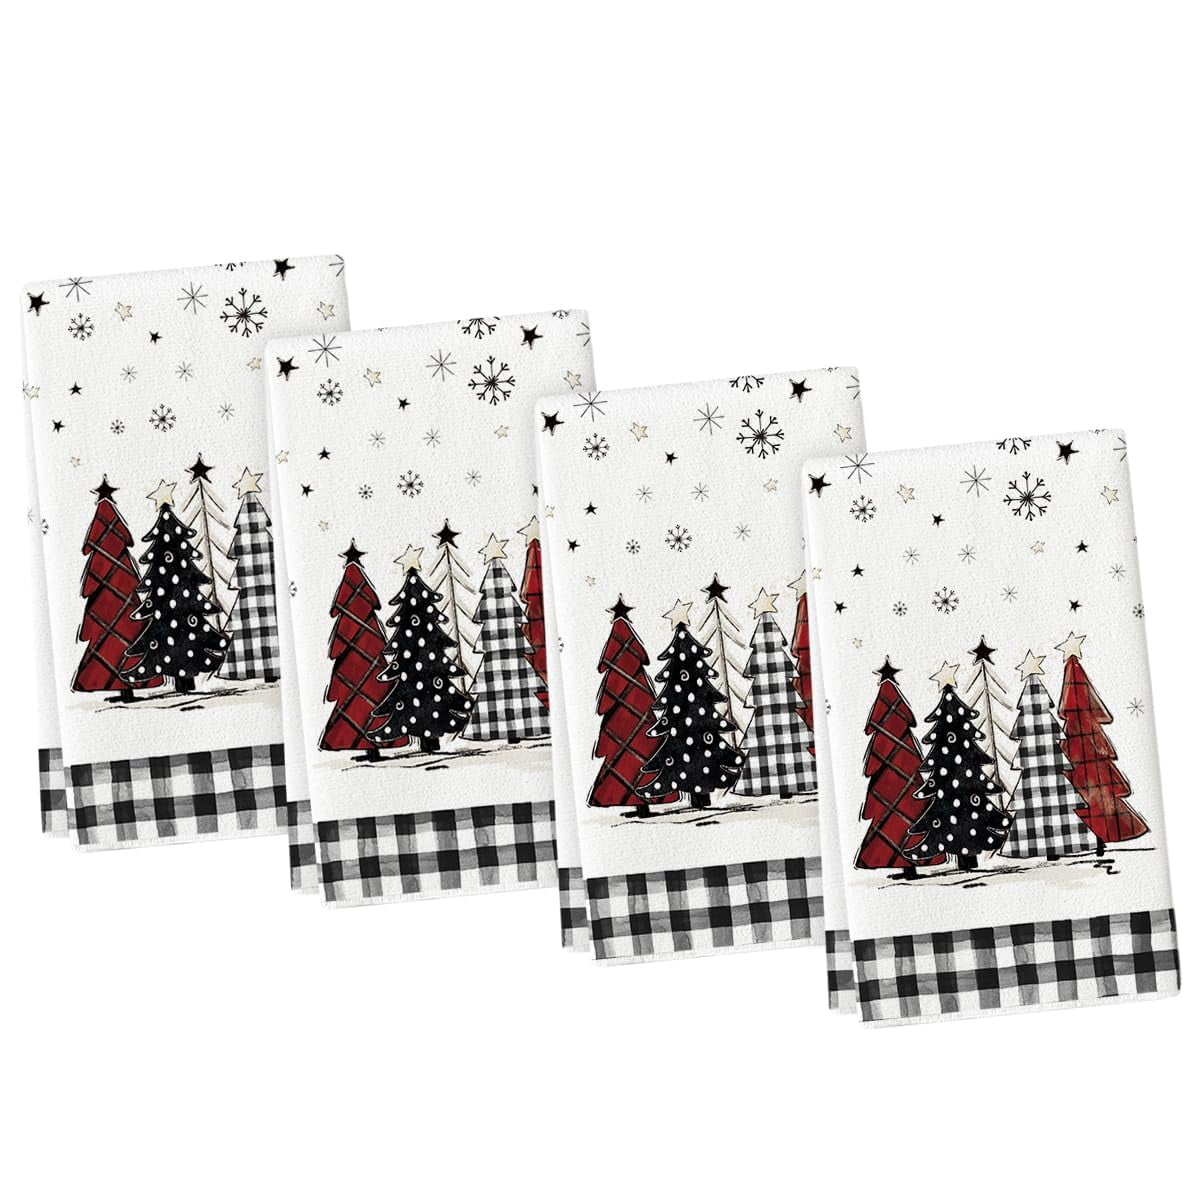 Artoid Mode Black Red Merry Christmas Kitchen Towels Dish Towels, 18x26  Inch Buffalo Plaid Winter Xmas Trees Star Decoration Hand Towels Set of 2